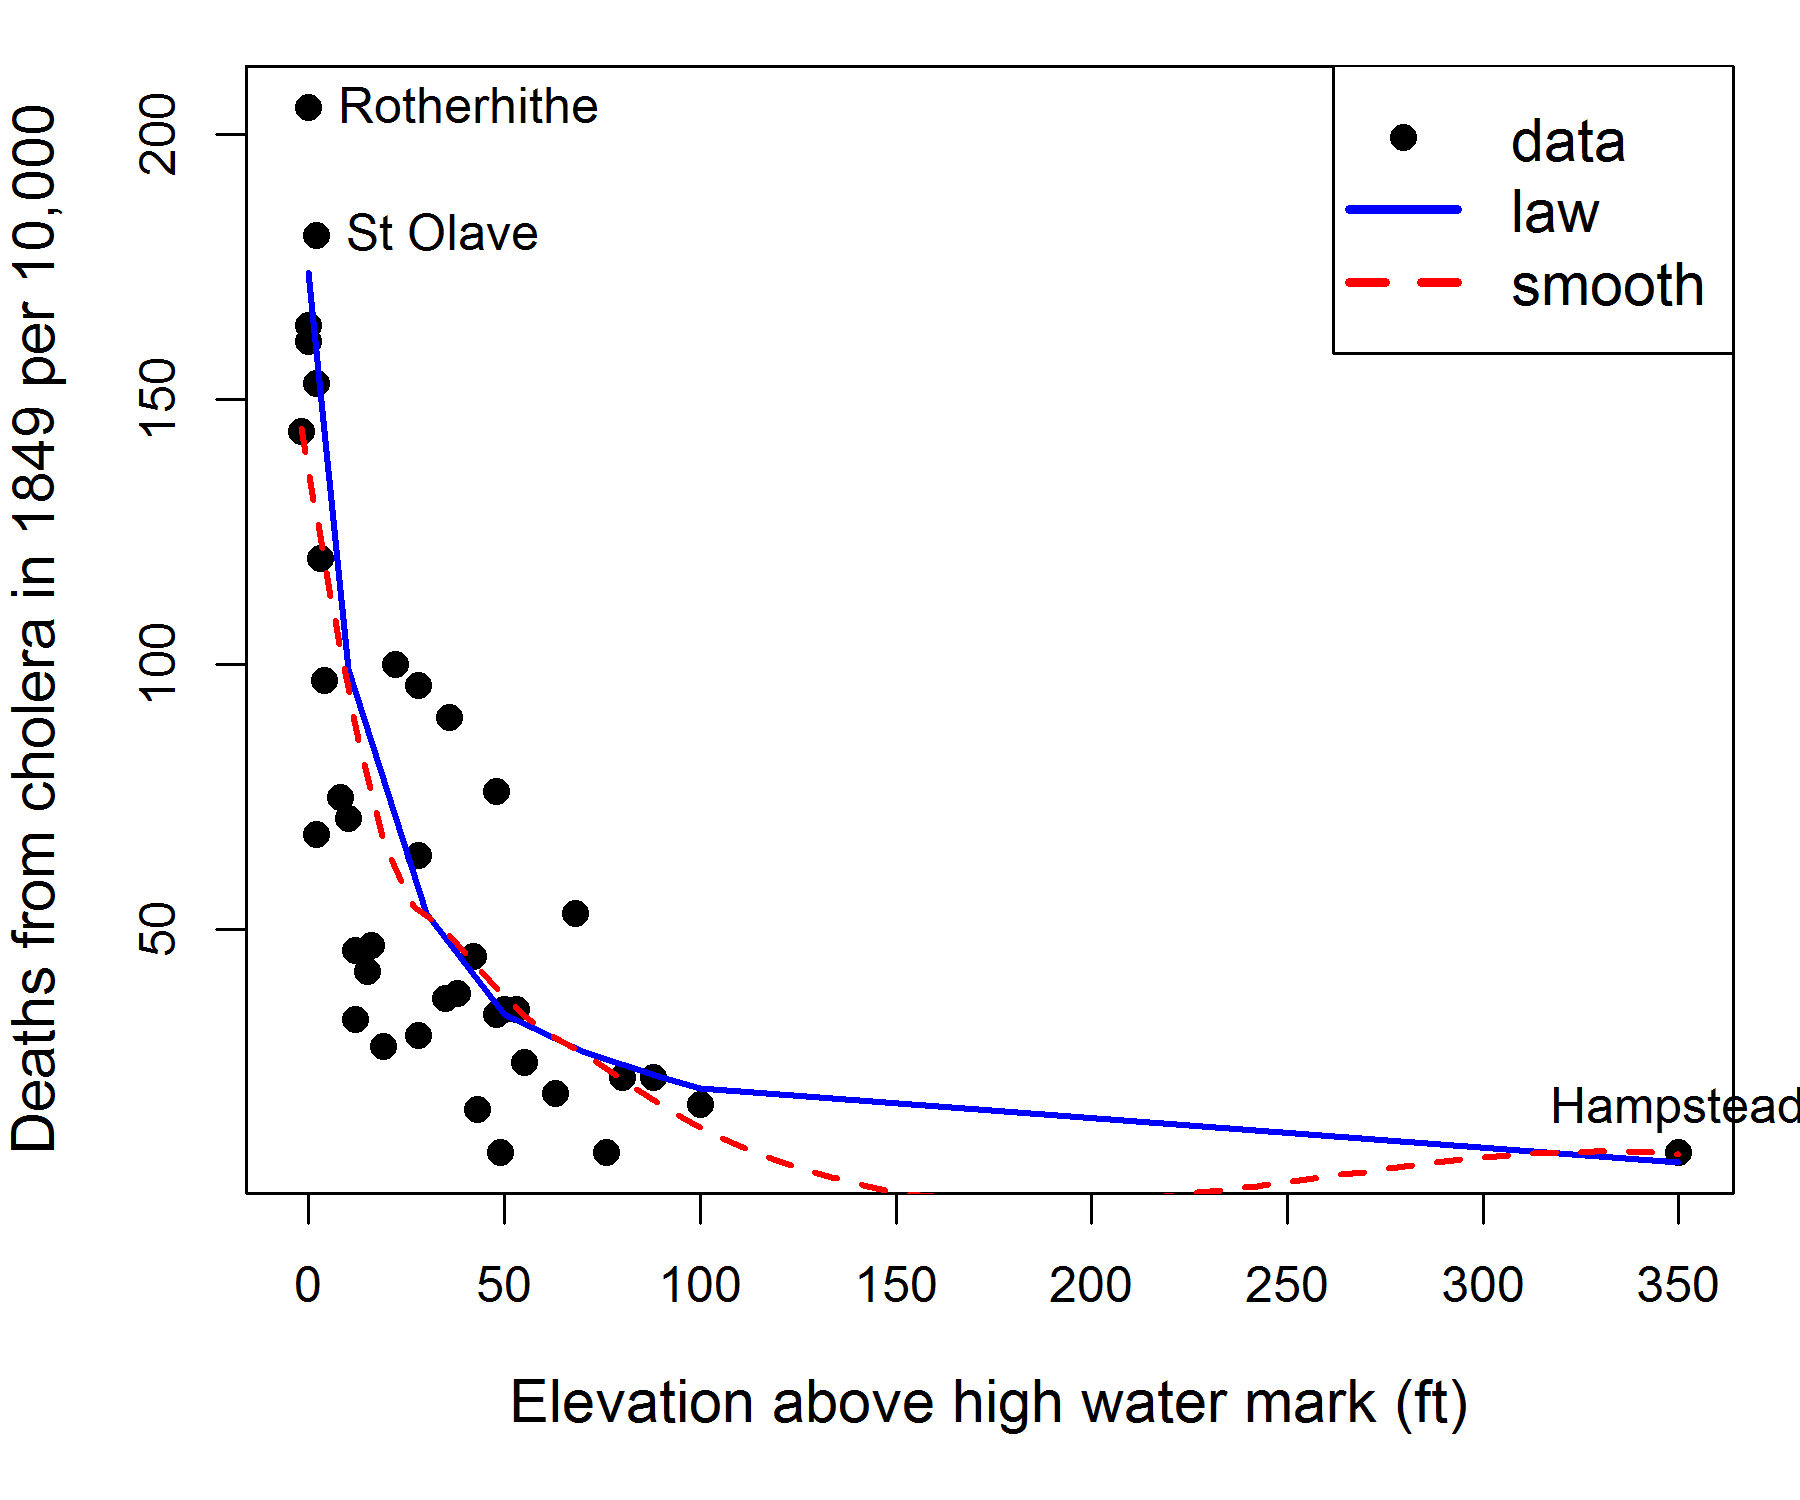 Scatterplot: Farr’s elevation—mortality data as a scatterplot, showing mortality (y) as the outcome, in relation to elevation (x) as the explanatory variable.